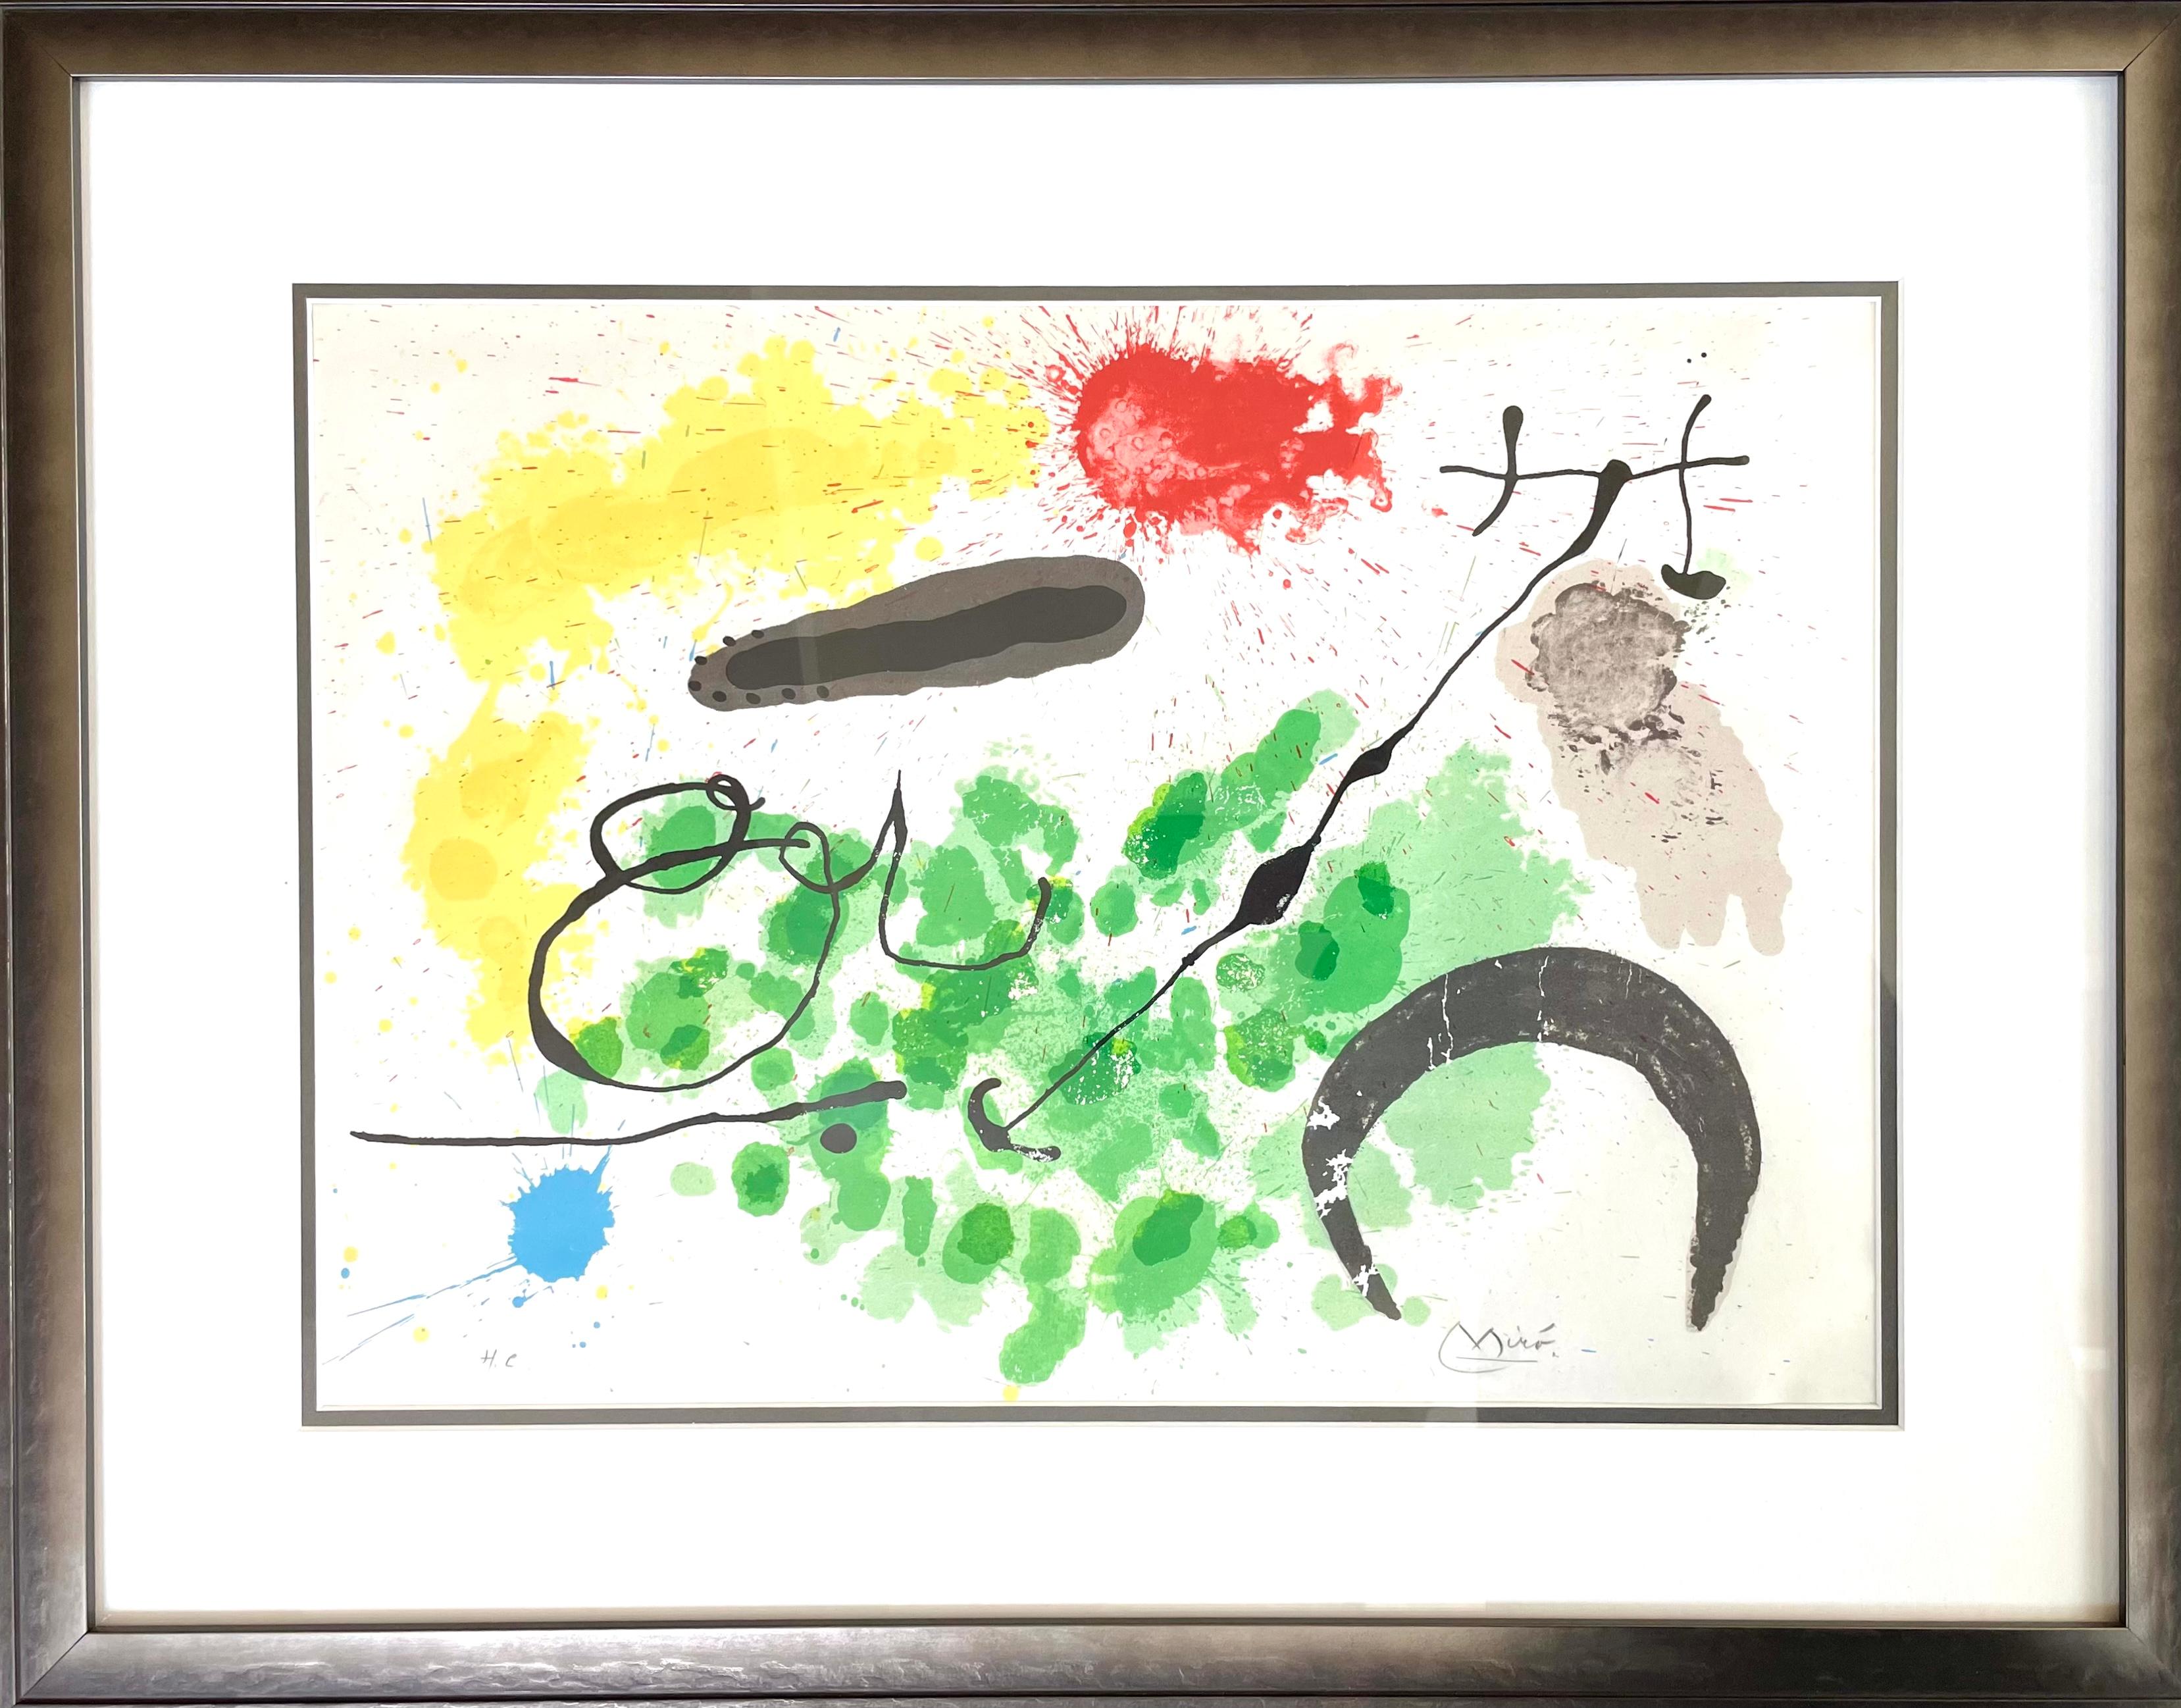  “Untitled” (from the Lezard aux Plumes d’Or series) - Modern Print by Joan Miró